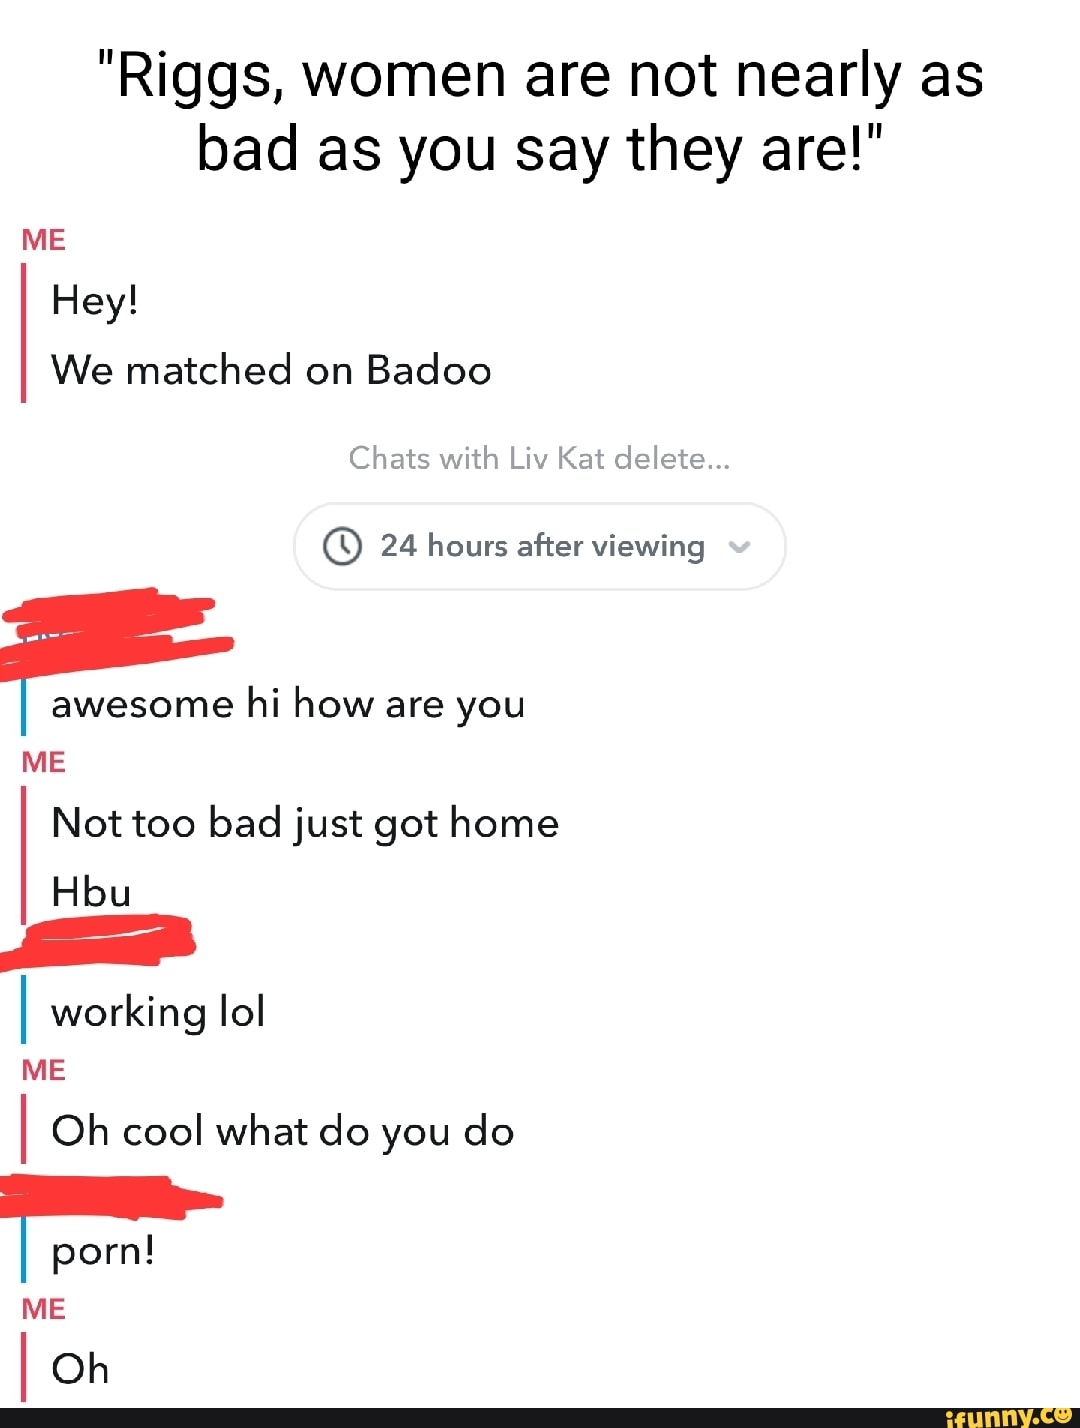 Do partner things badoo in bad your 10 things